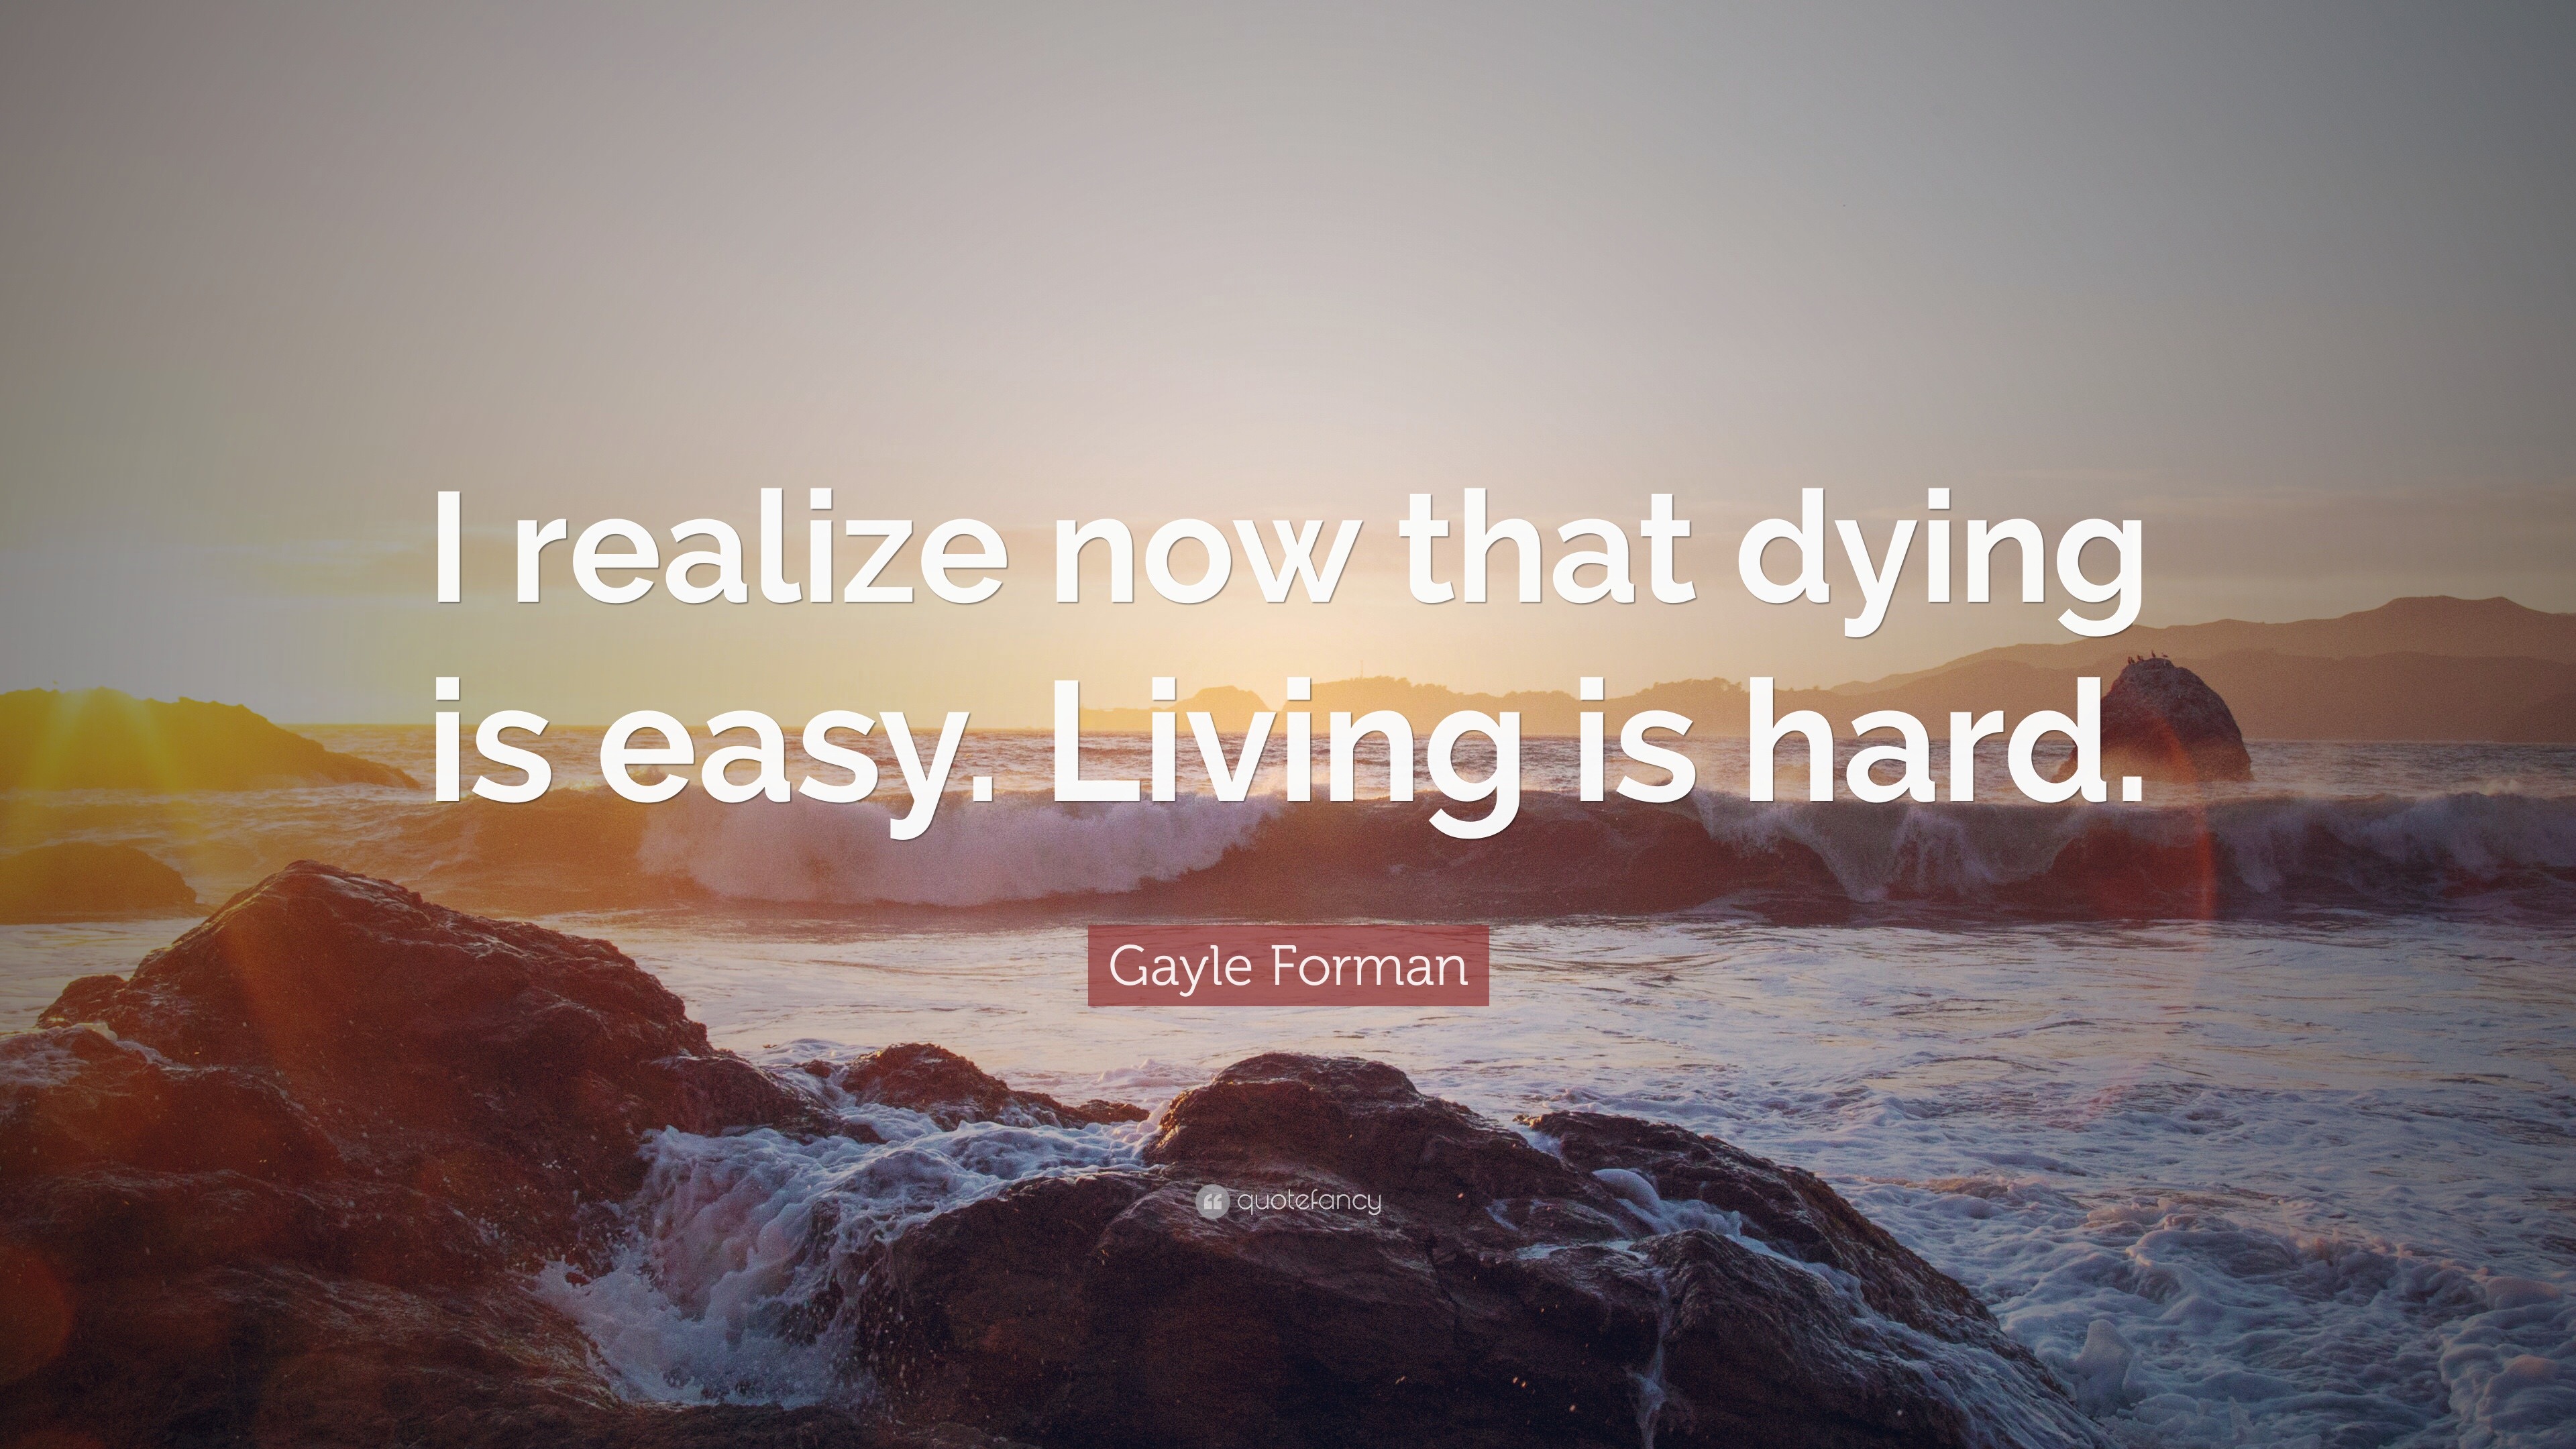 Gayle Forman Quote: “I Realize Now That Dying Is Easy. Living Is Hard.”